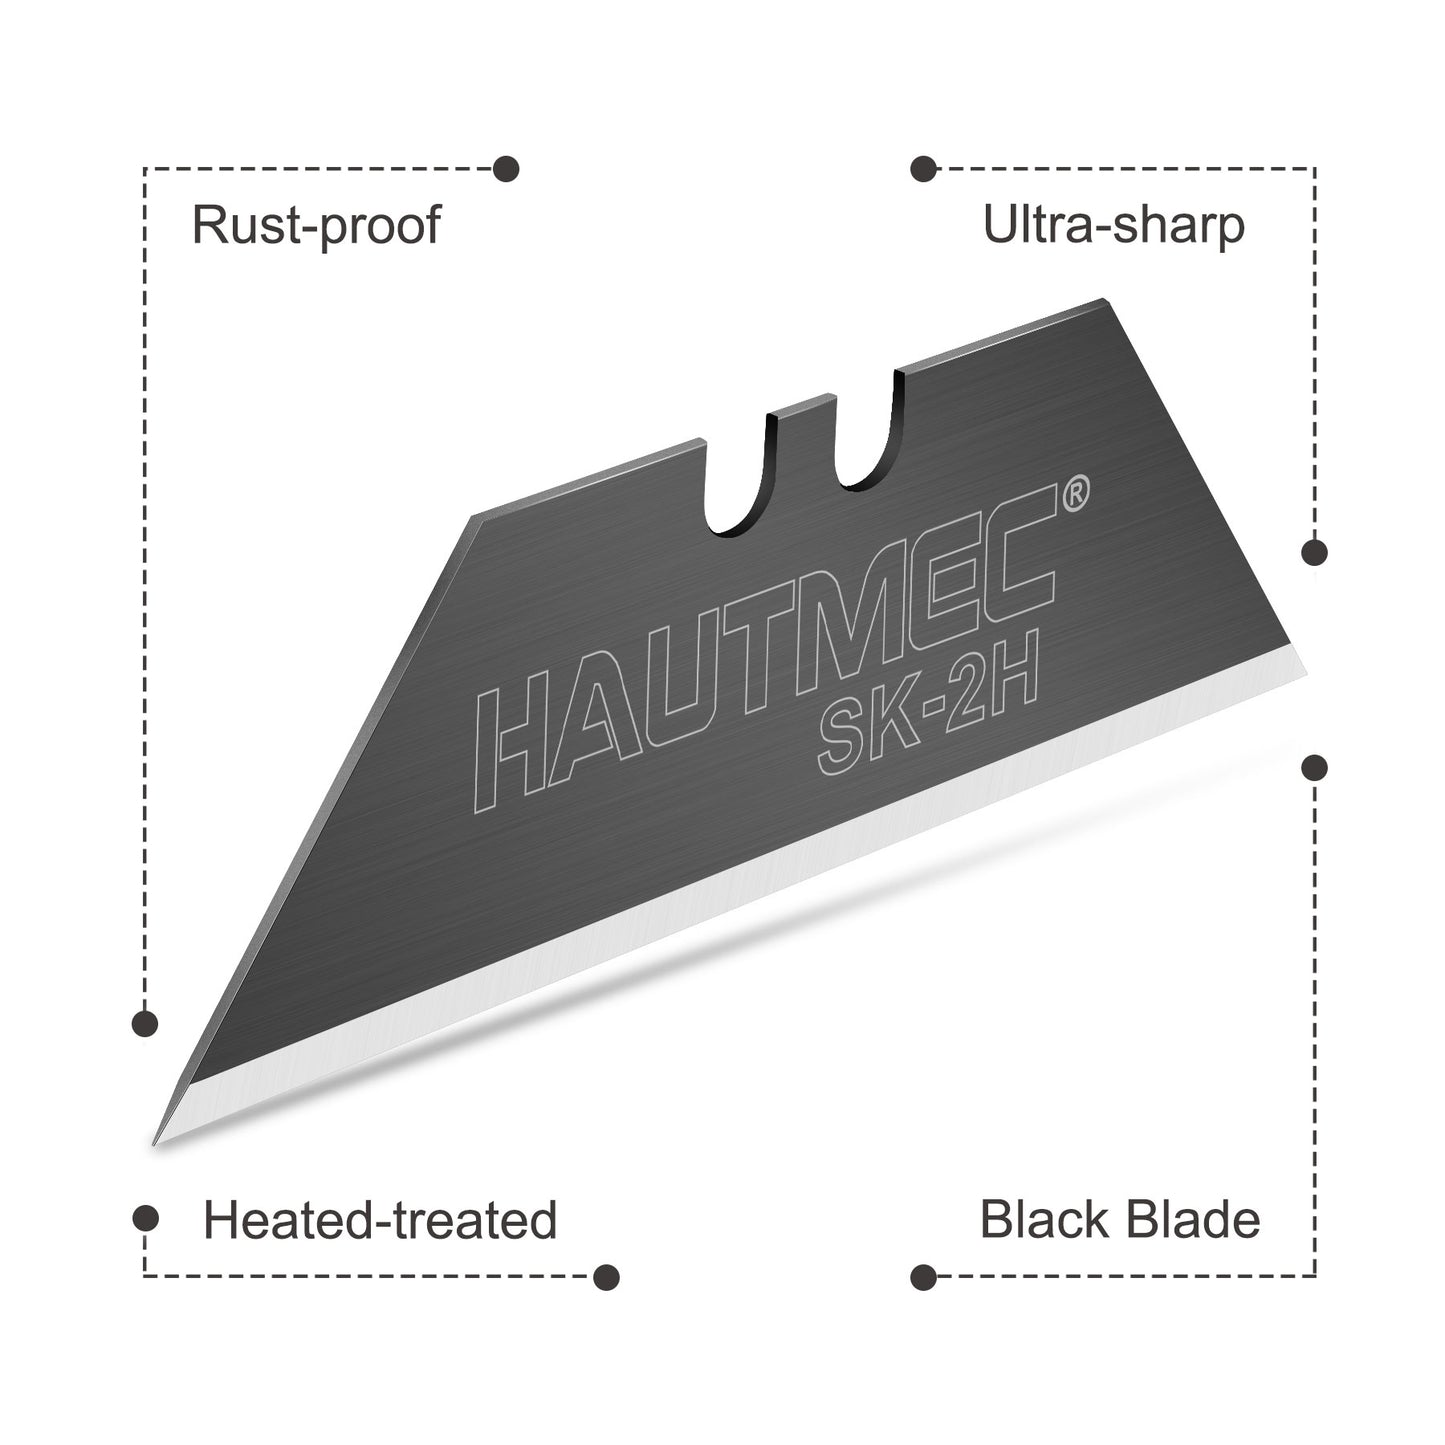 HAUTMEC Utility Knife Blades, 10-Pack with Dispenser, Standard Replacement Blades for Heavy Duty Utility Knives and Box Cutters, Sharper SK2H Black Blades HT0265-KN